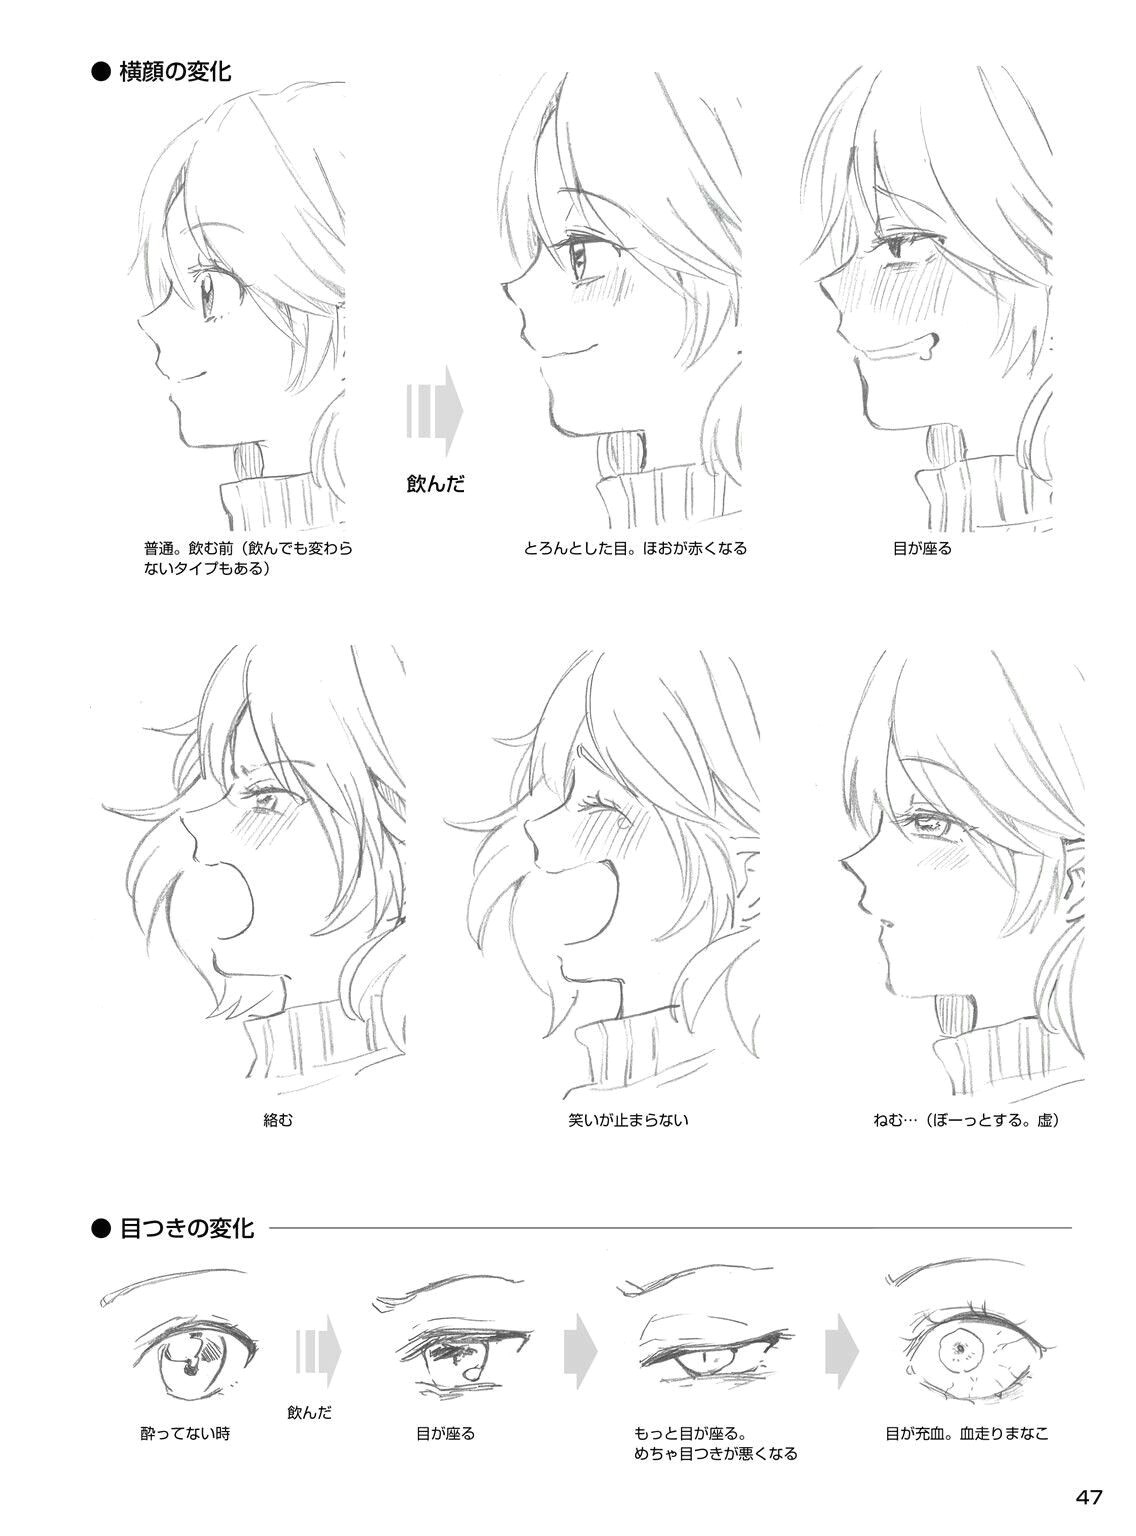 Drawing Anime Facial Expressions Pin by Alice K On Facial Expressions Pinterest Drawings Manga